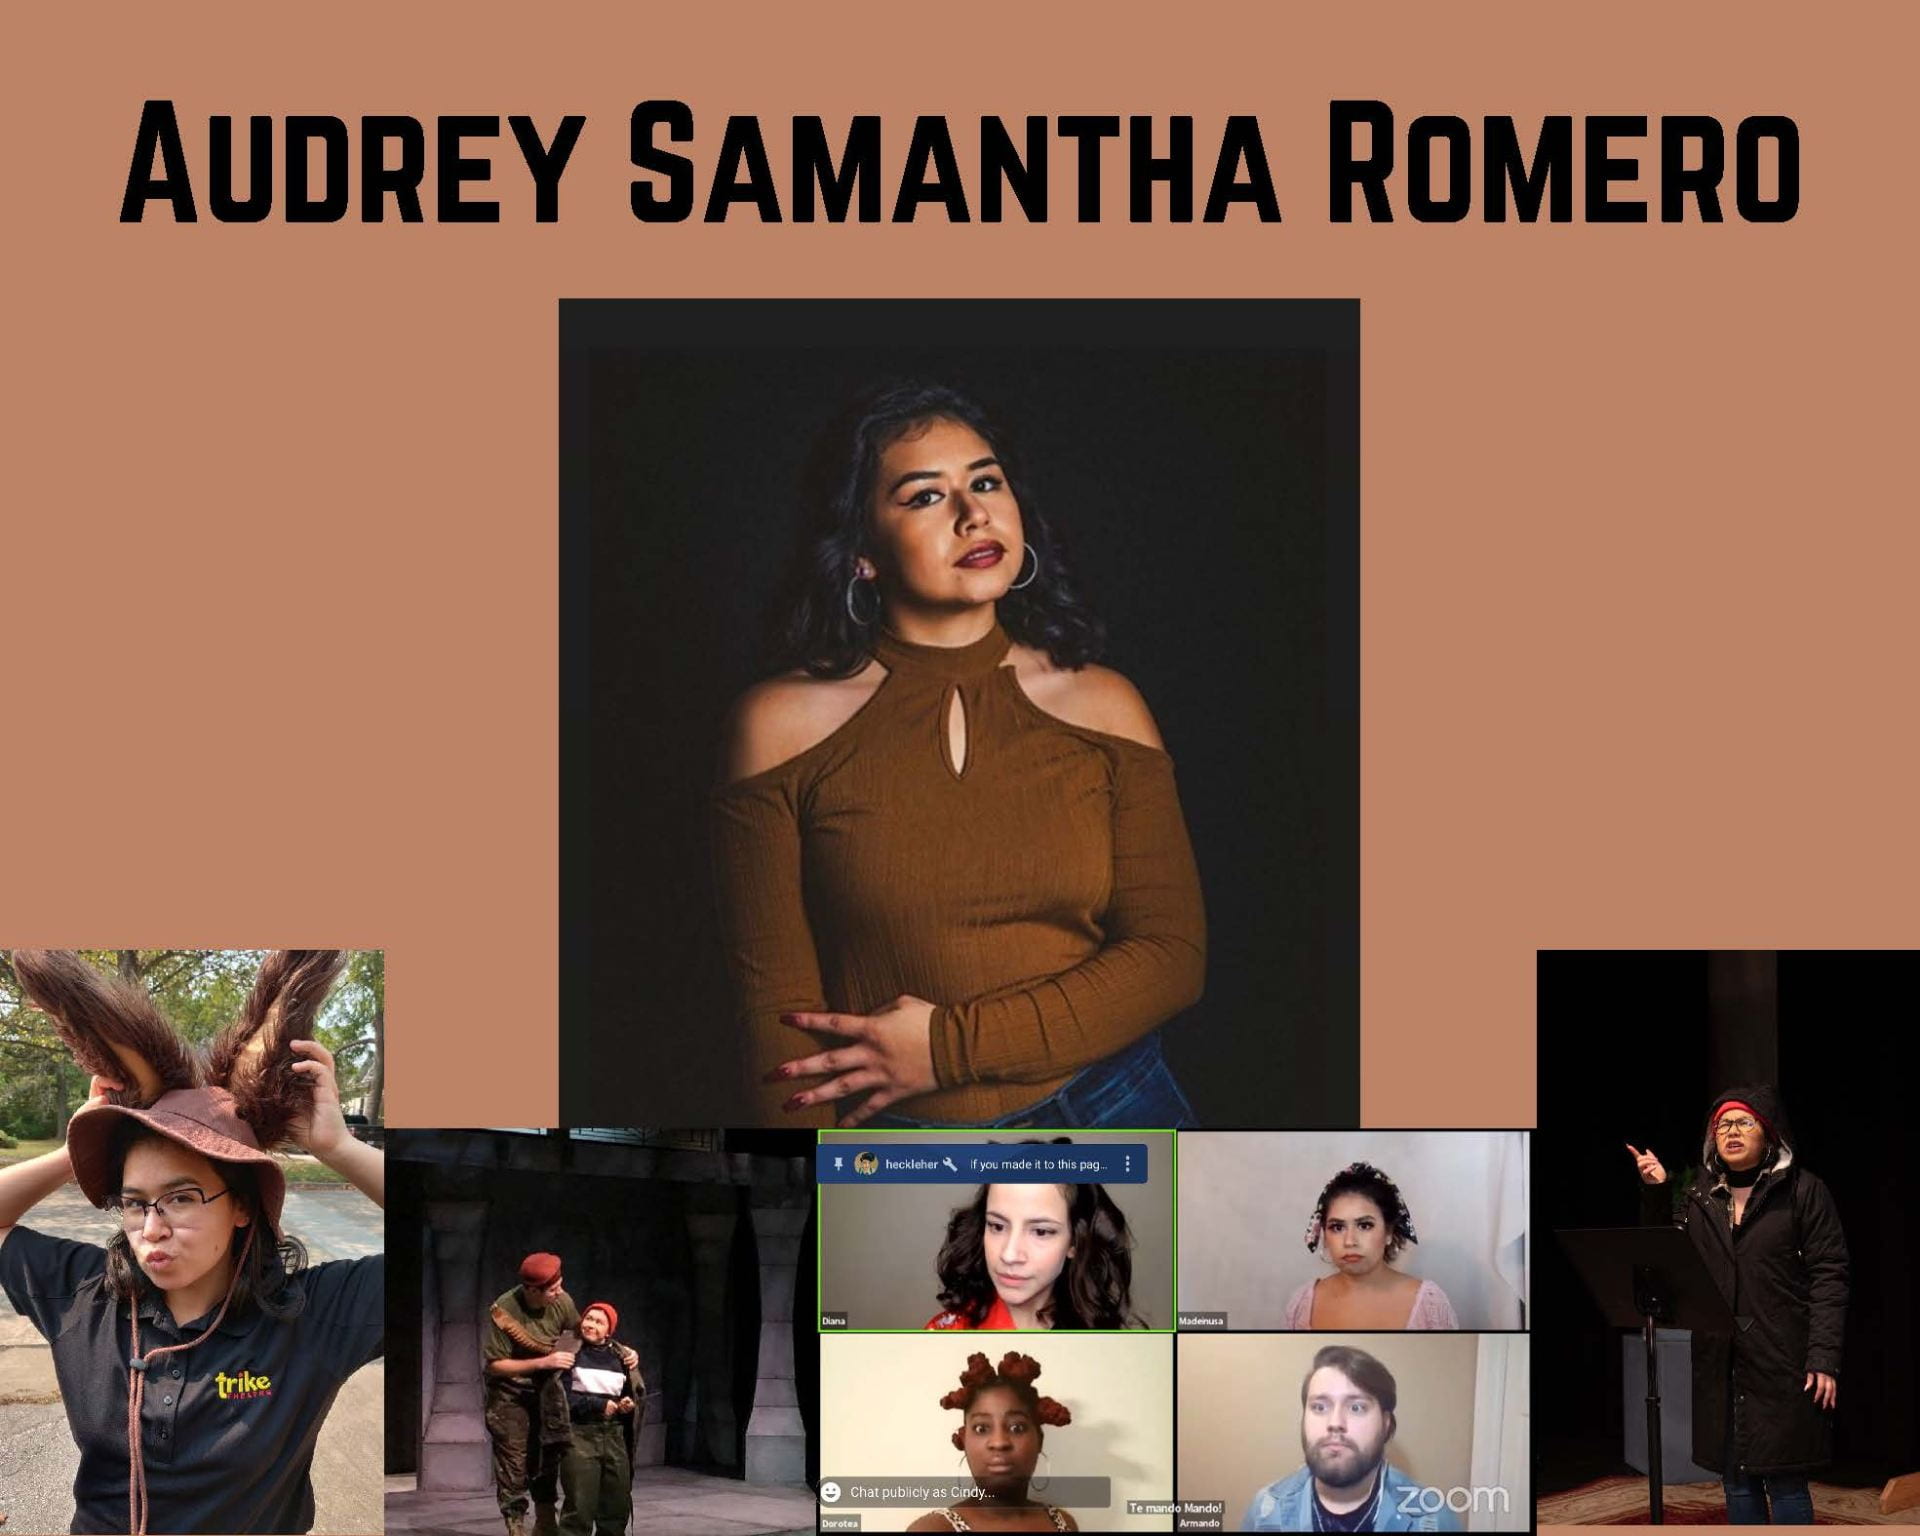 An image collage featuring images of the Audrey Romero over an orange background and words at the top: "Audrey Samantha Romero"